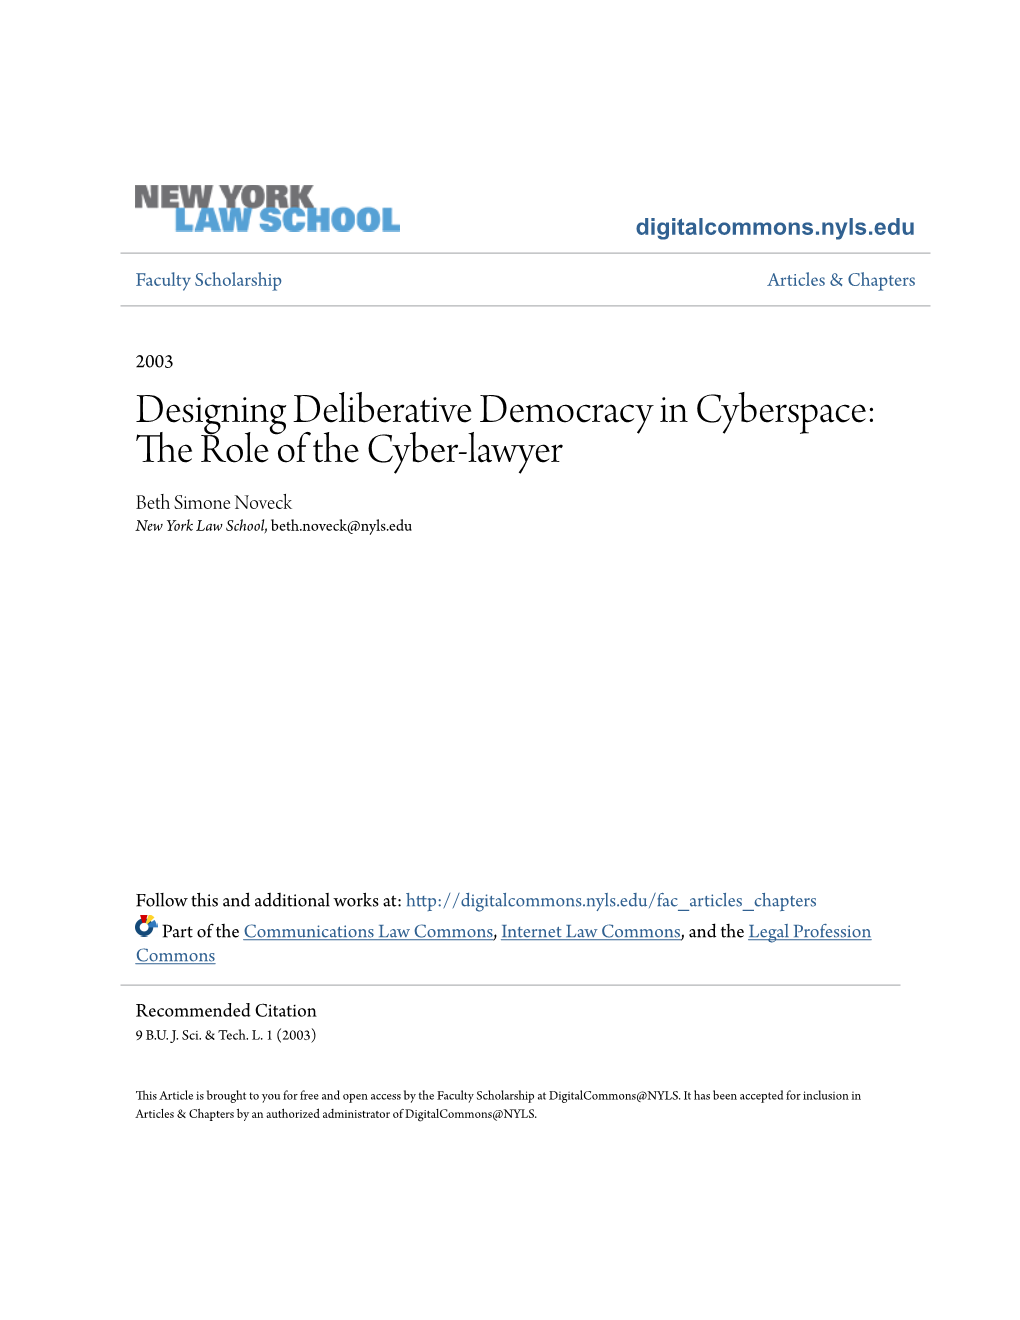 Designing Deliberative Democracy in Cyberspace: the Role of the Cyber-Lawyer Beth Simone Noveck New York Law School, Beth.Noveck@Nyls.Edu